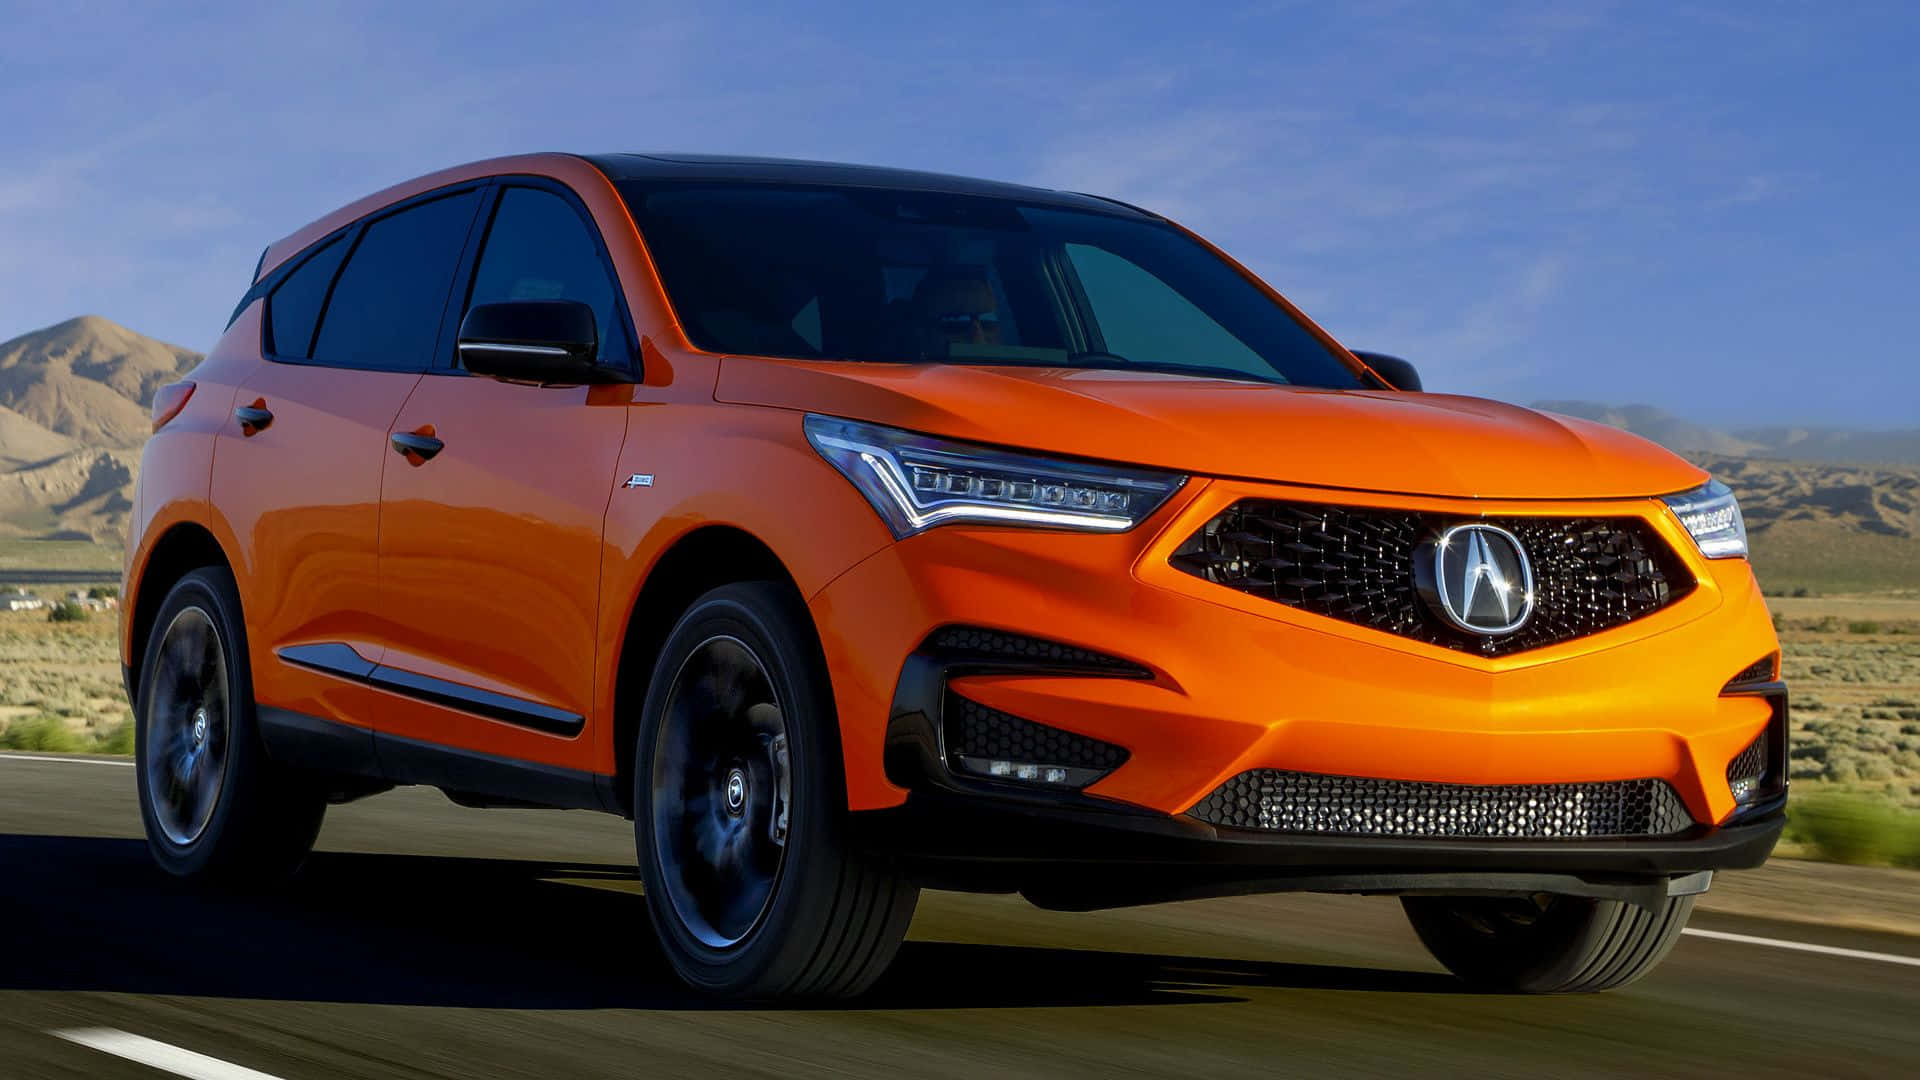 Make Way for the New Acura RDX 2022 SUV